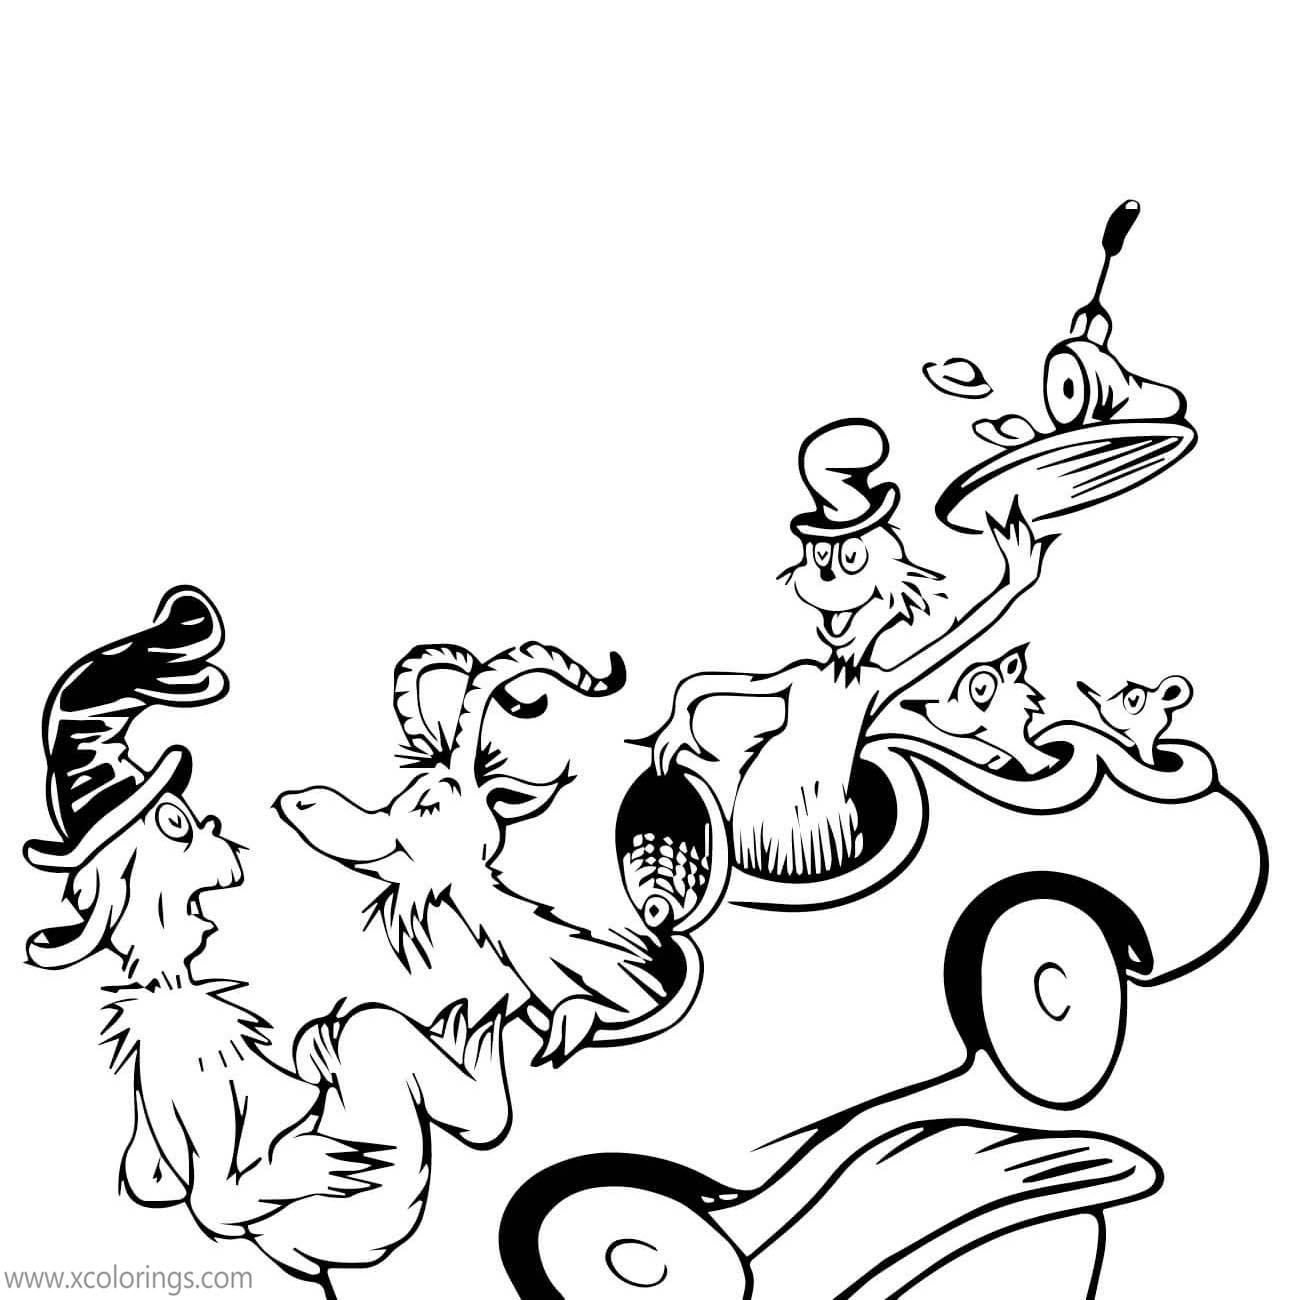 Free Green Eggs and Ham Coloring Pages Characters On the Car printable